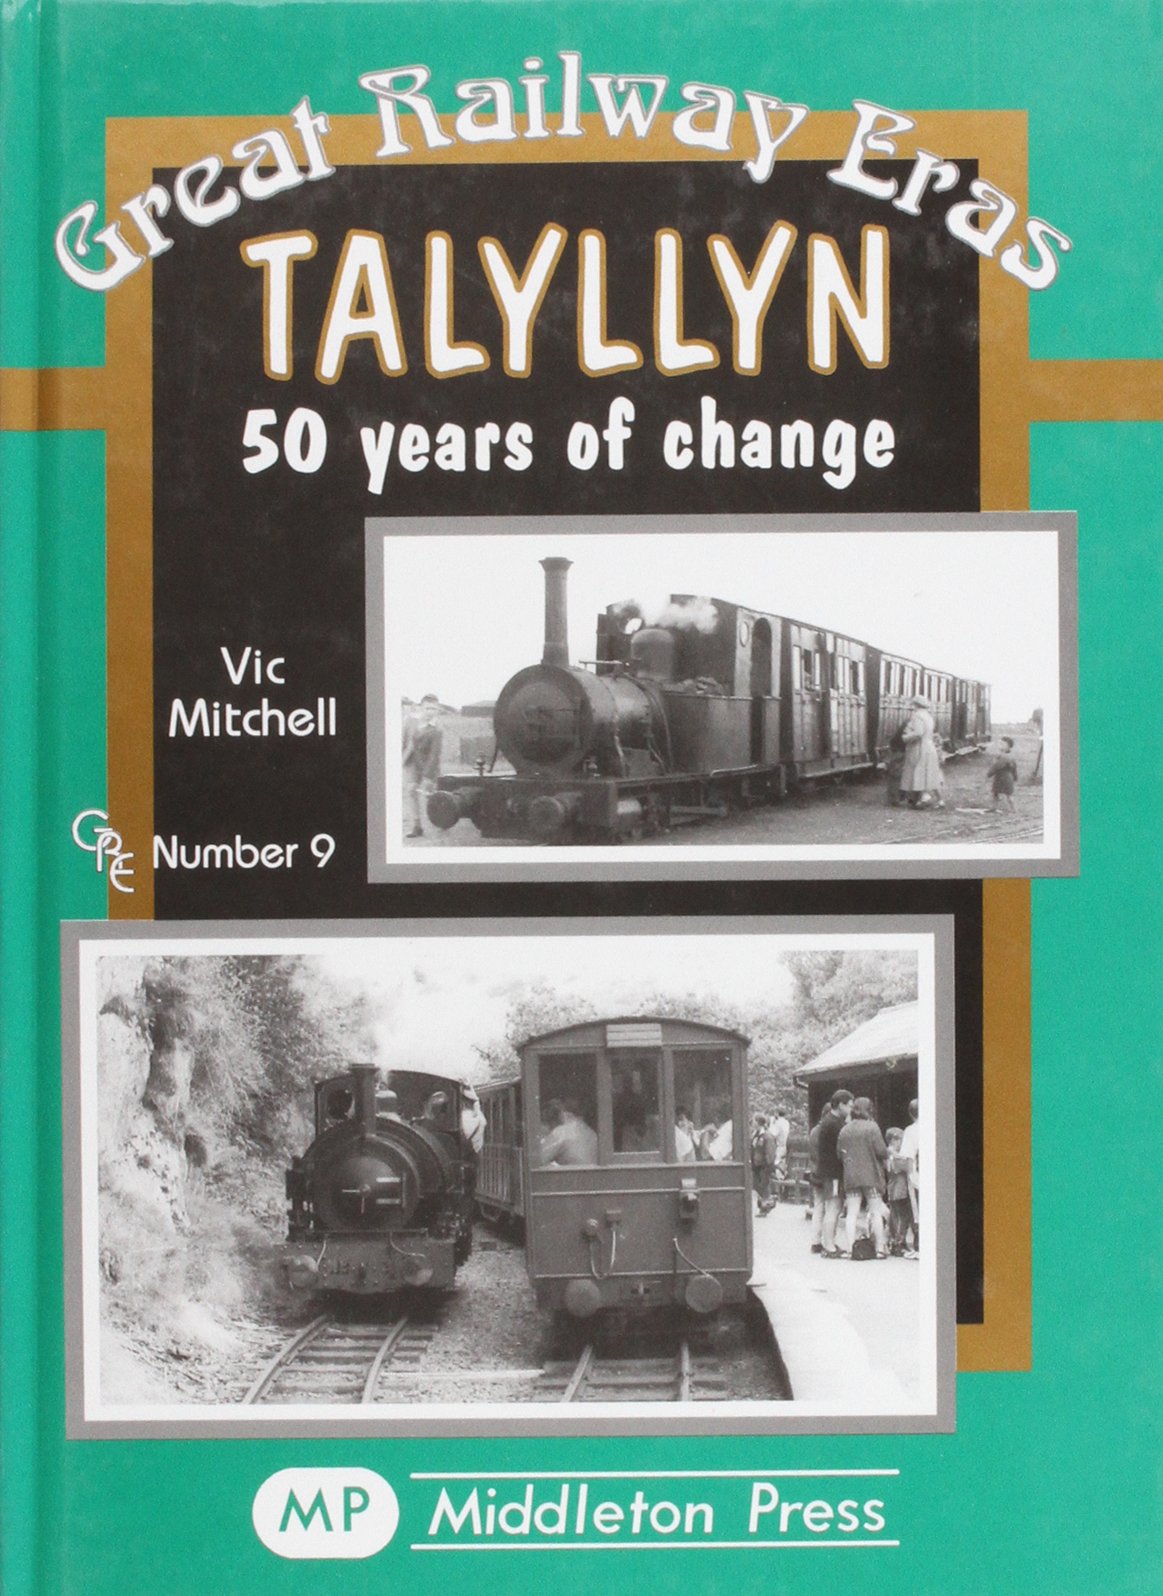 Great Railway Eras Talyllyn 50 years of change OUT OF PRINT TO BE REPRINTED